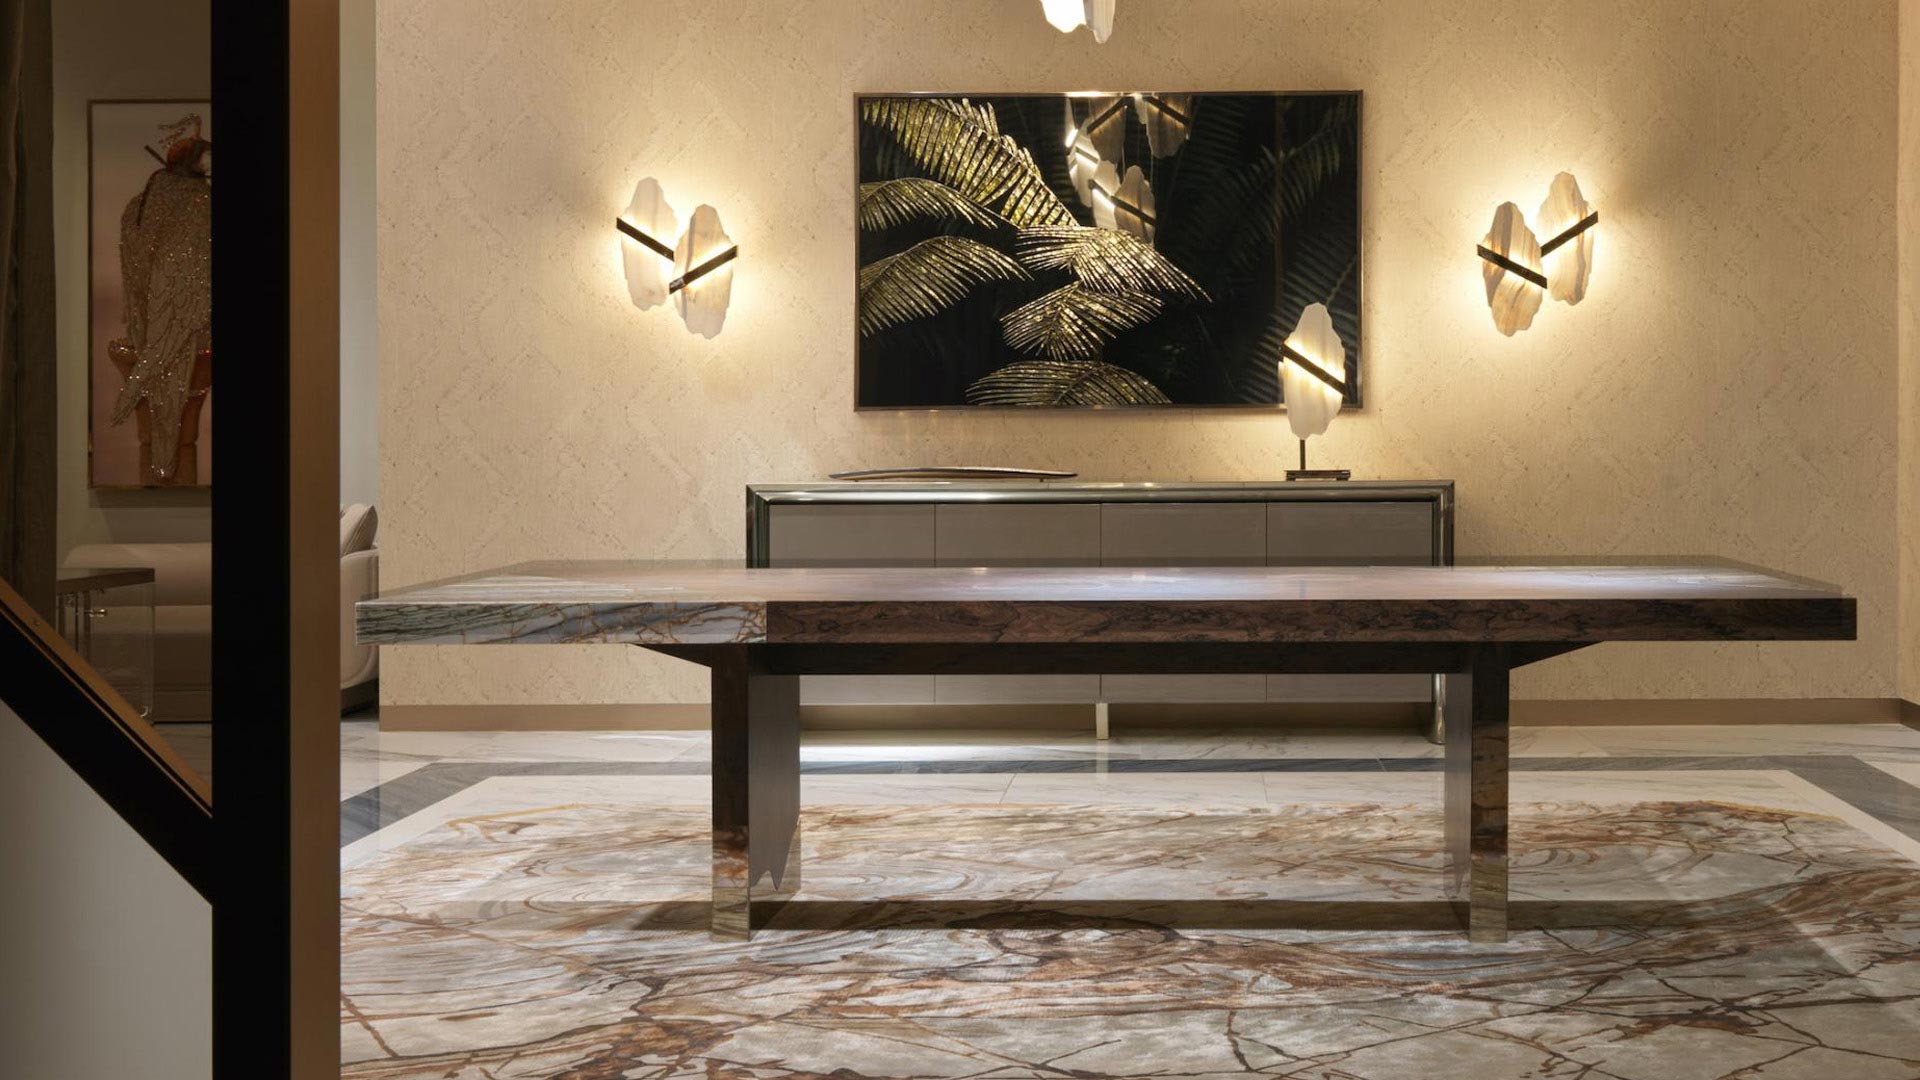 Valiant dining table by Alessandro La Spada for Visionnaire